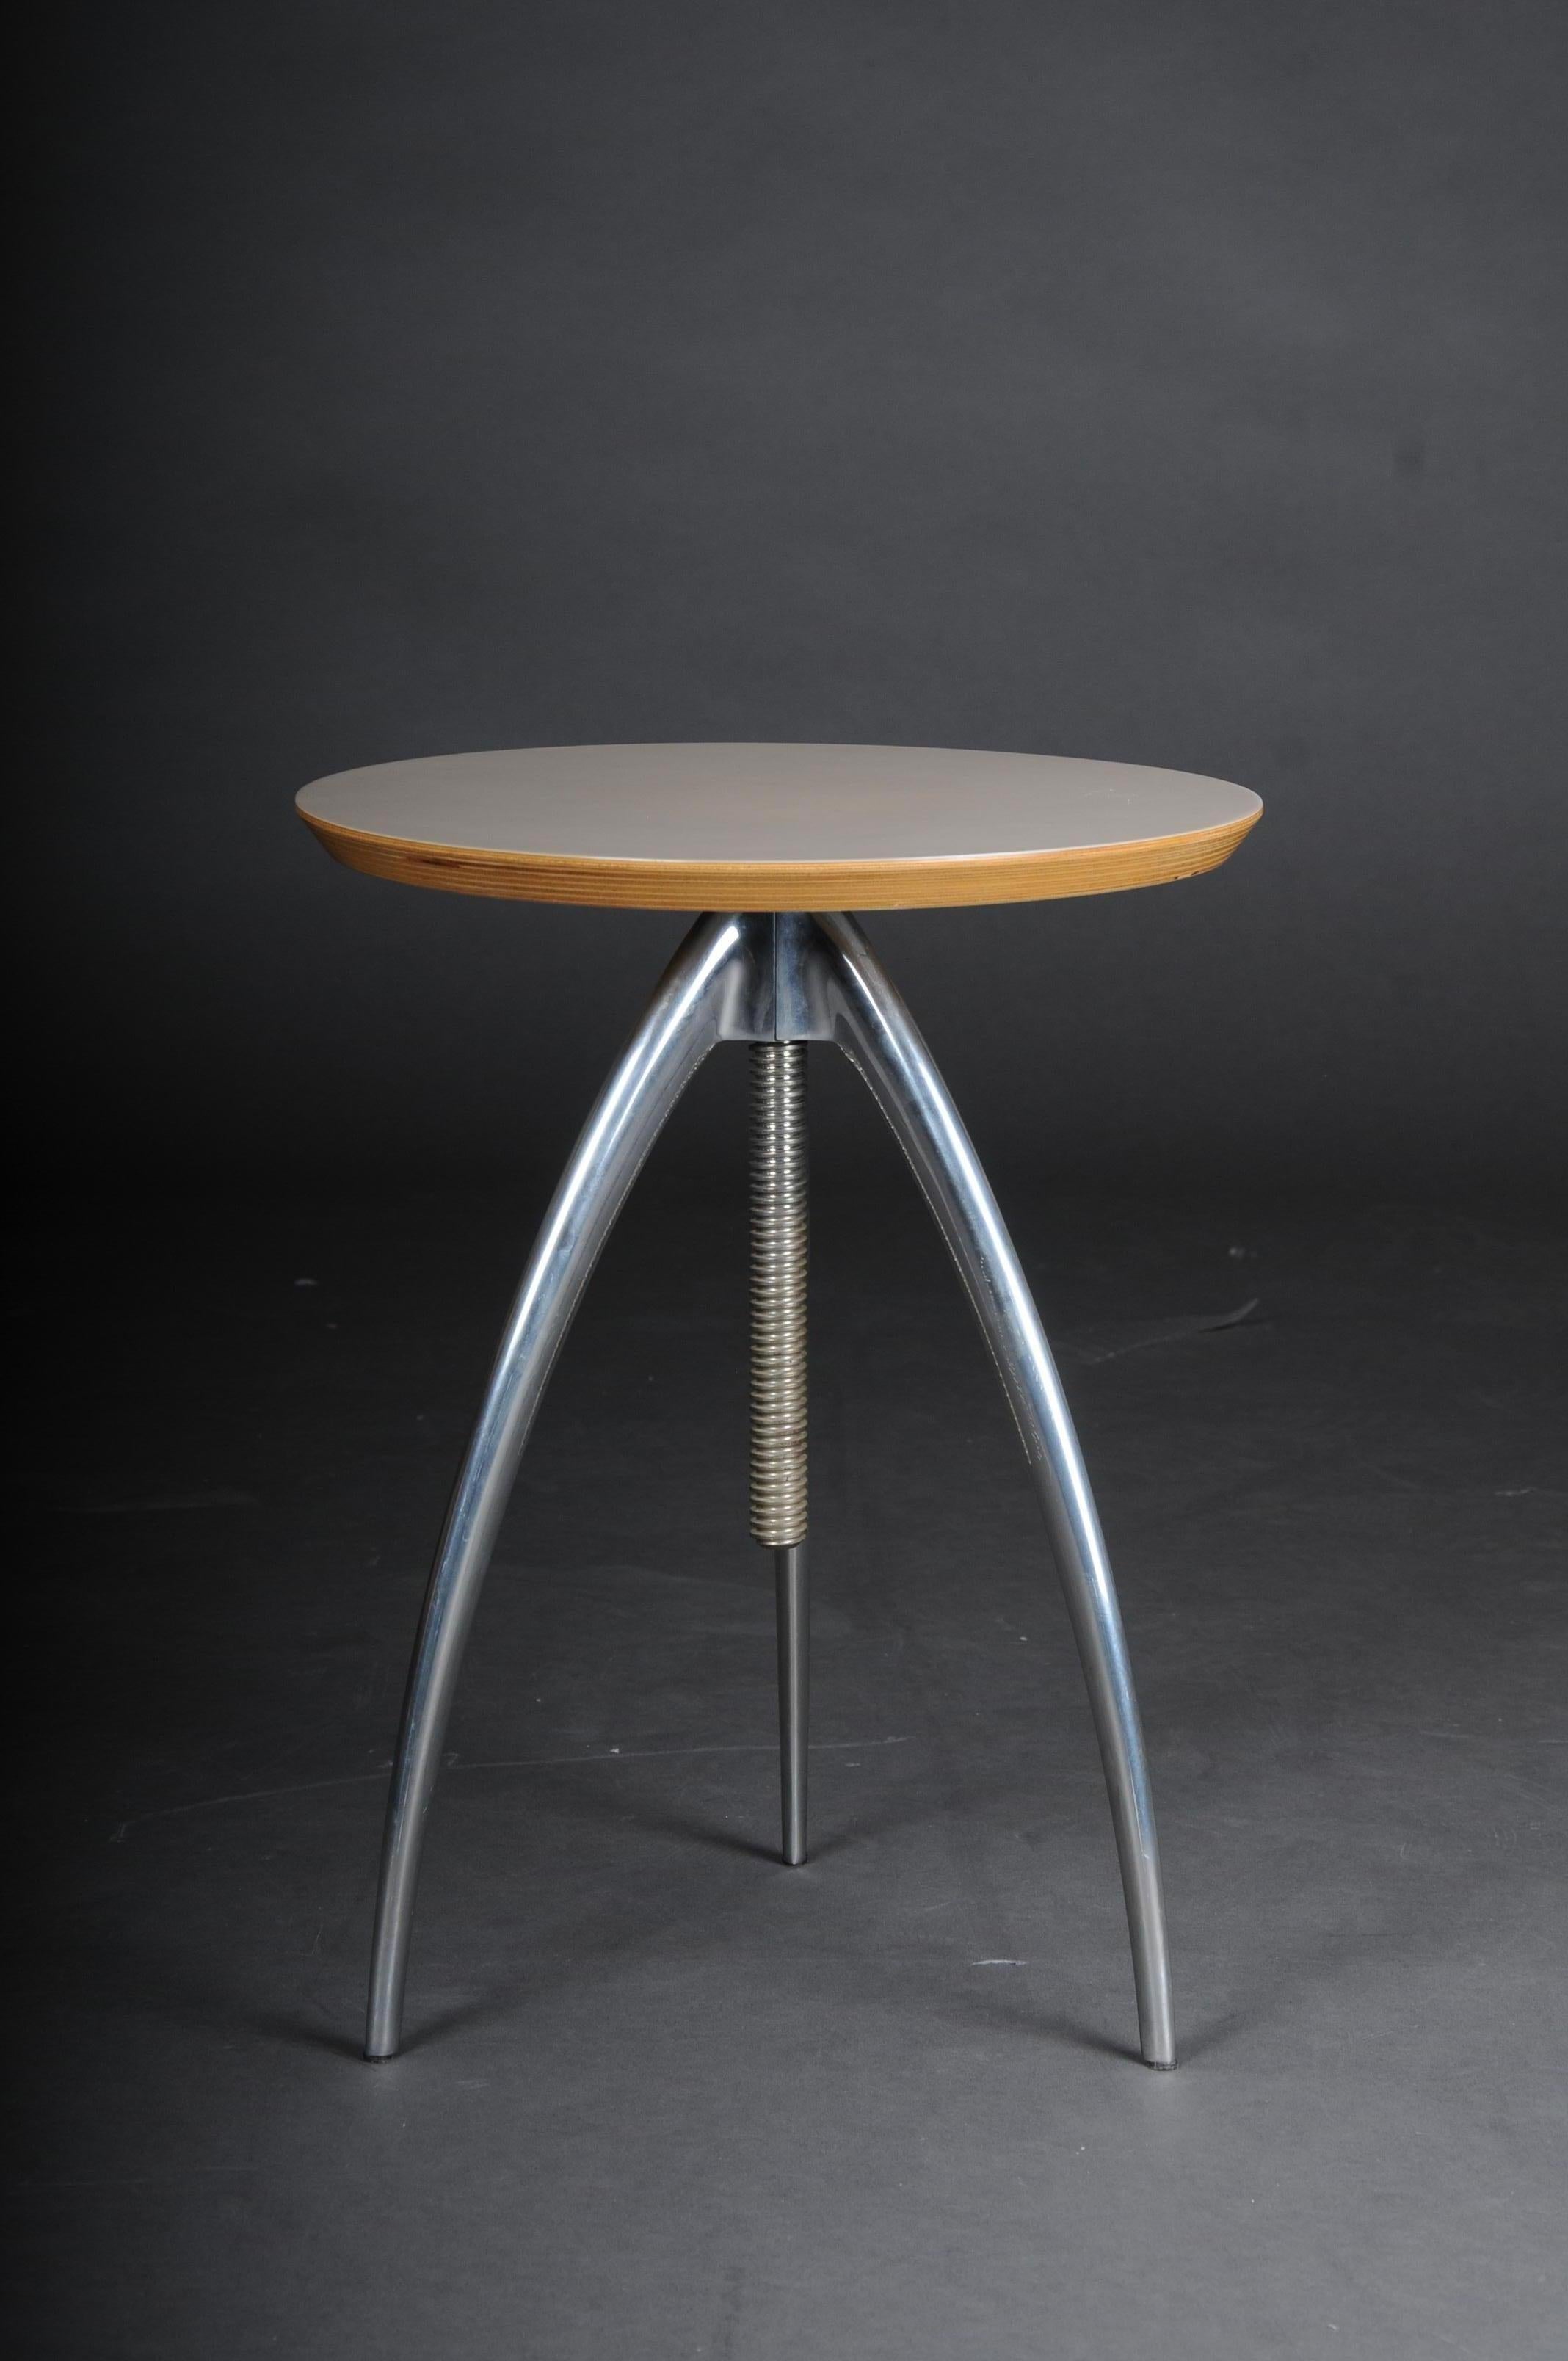 Designer side table / table Philippe Starck Driade Vicieuse Ubik Aleph.

Polished die-cast aluminum and maple plywood with melamine-formaldehyde laminate.
Philippe Starck Vicieuse side table for Driade Beautiful side table designed by Philippe